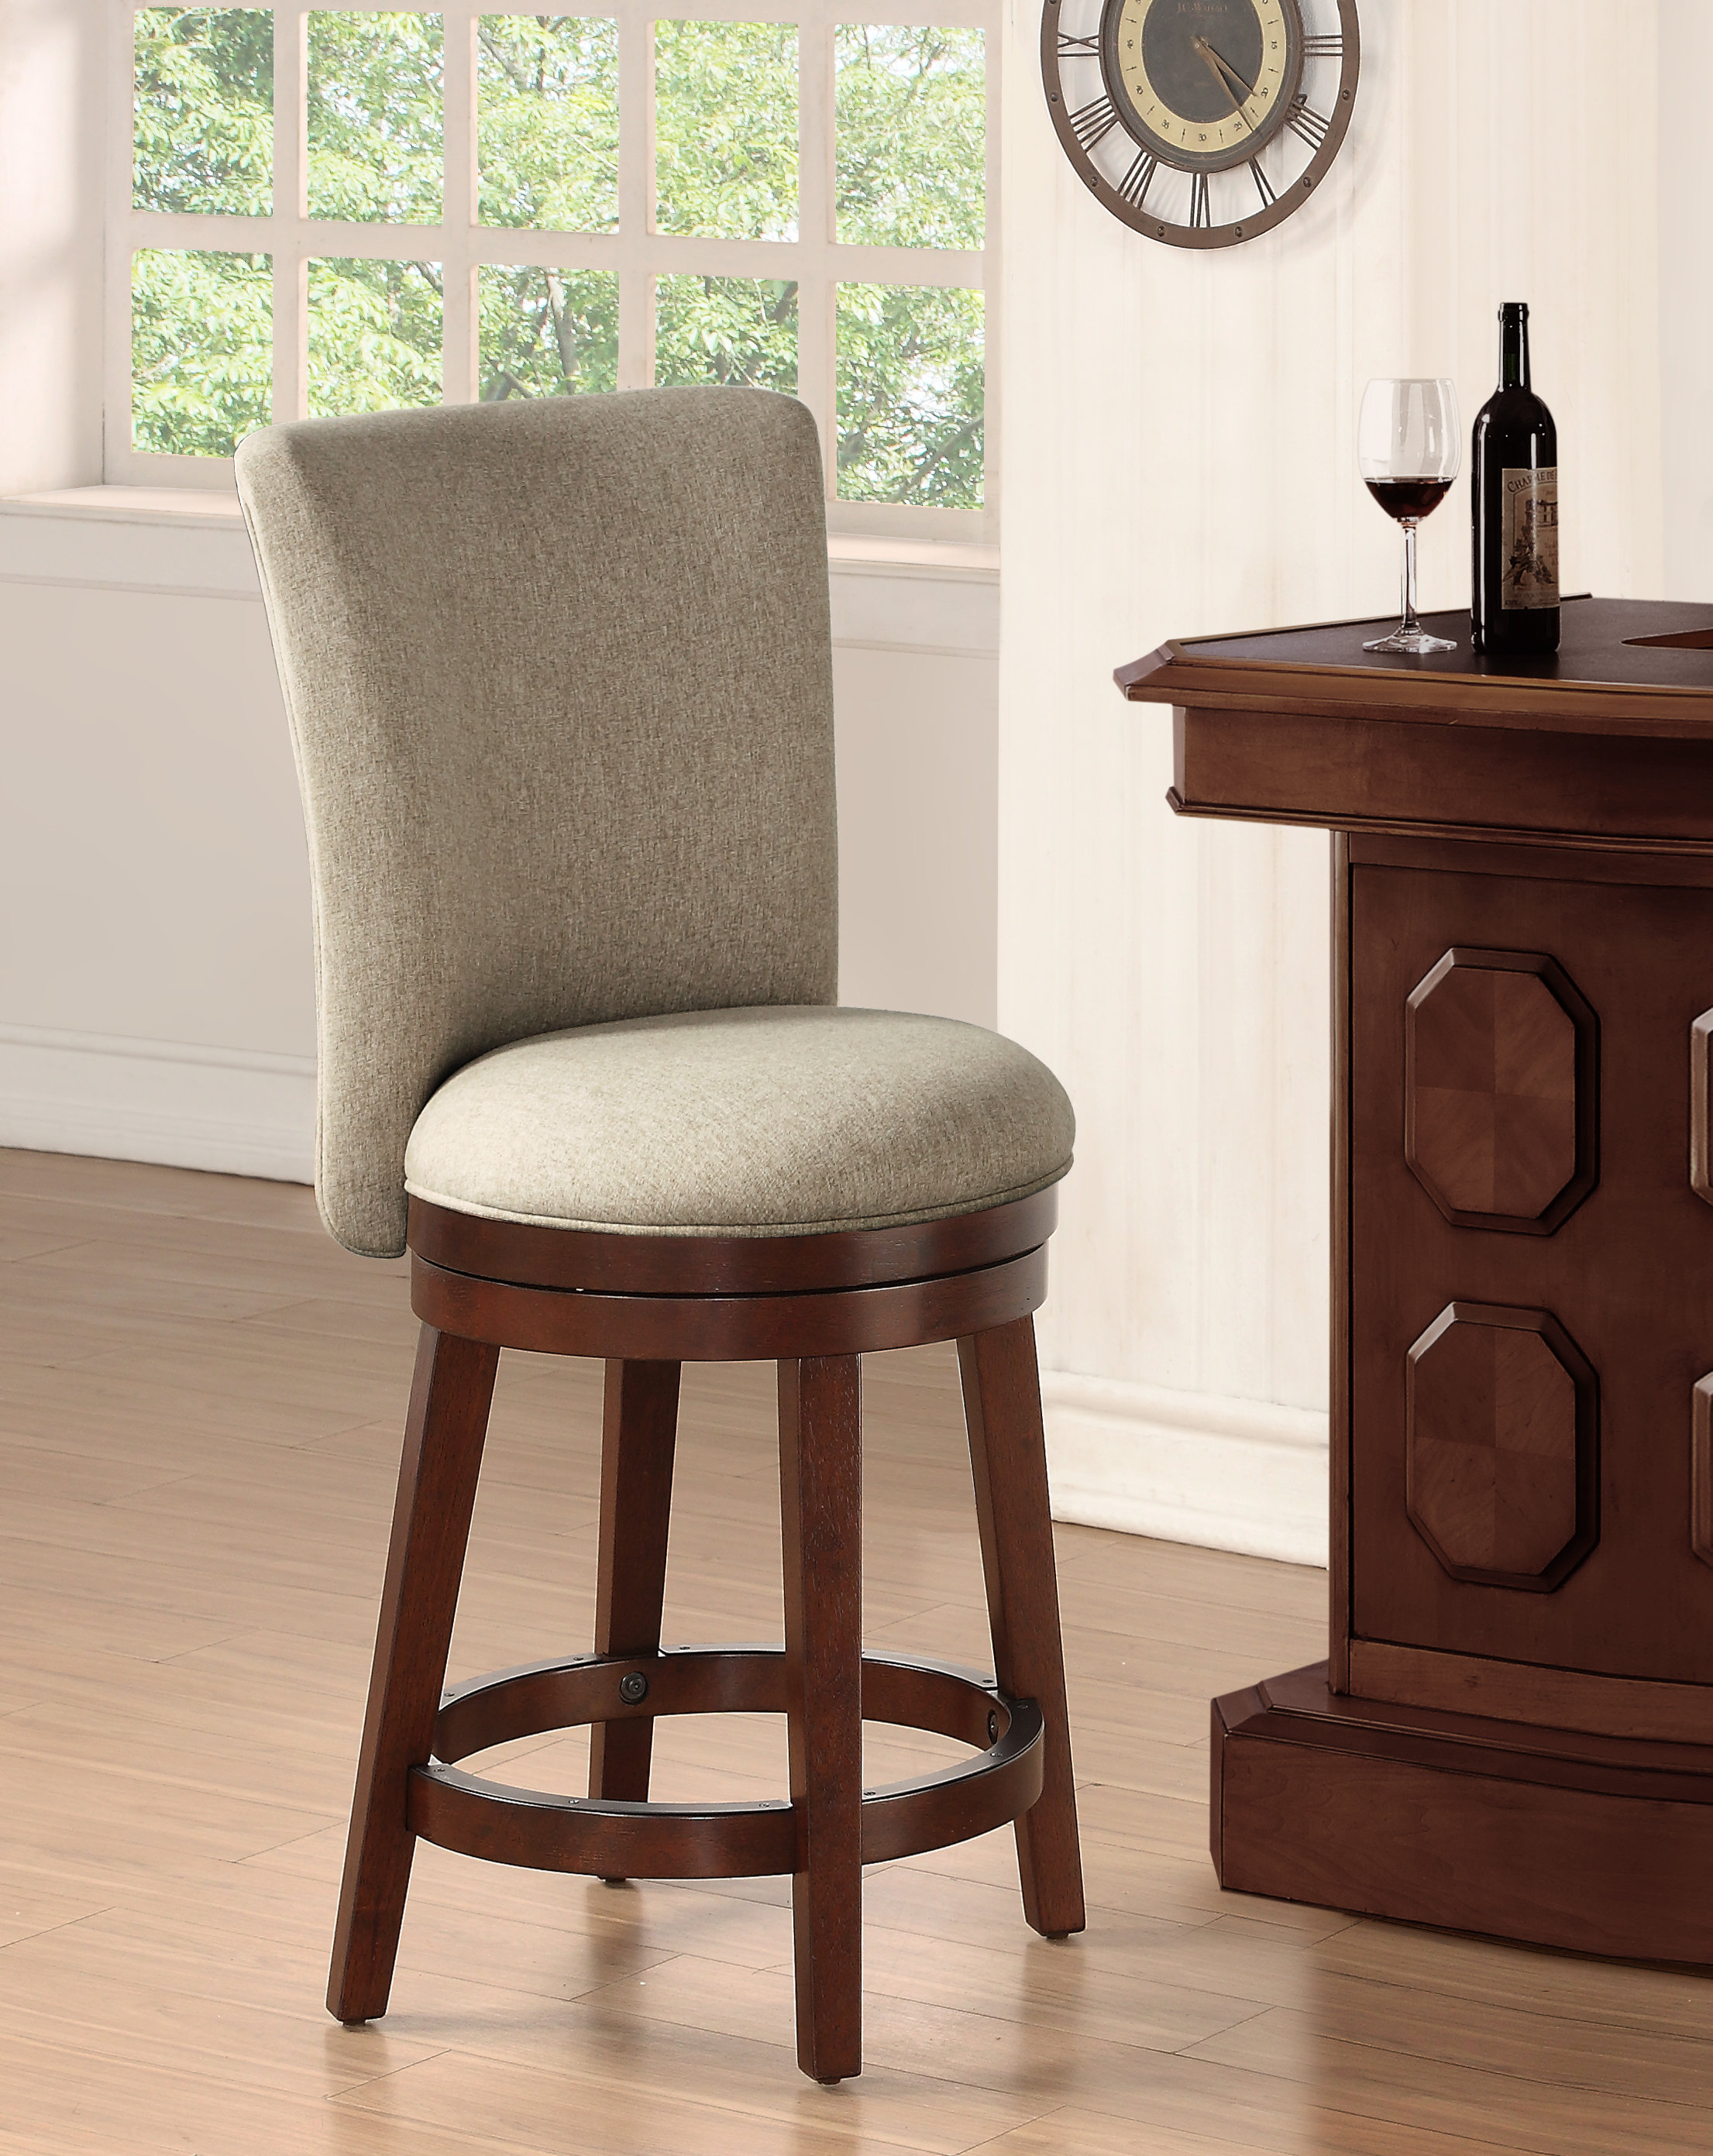 United States Army This Well Defend Padded Swivel Bar Stool with Back